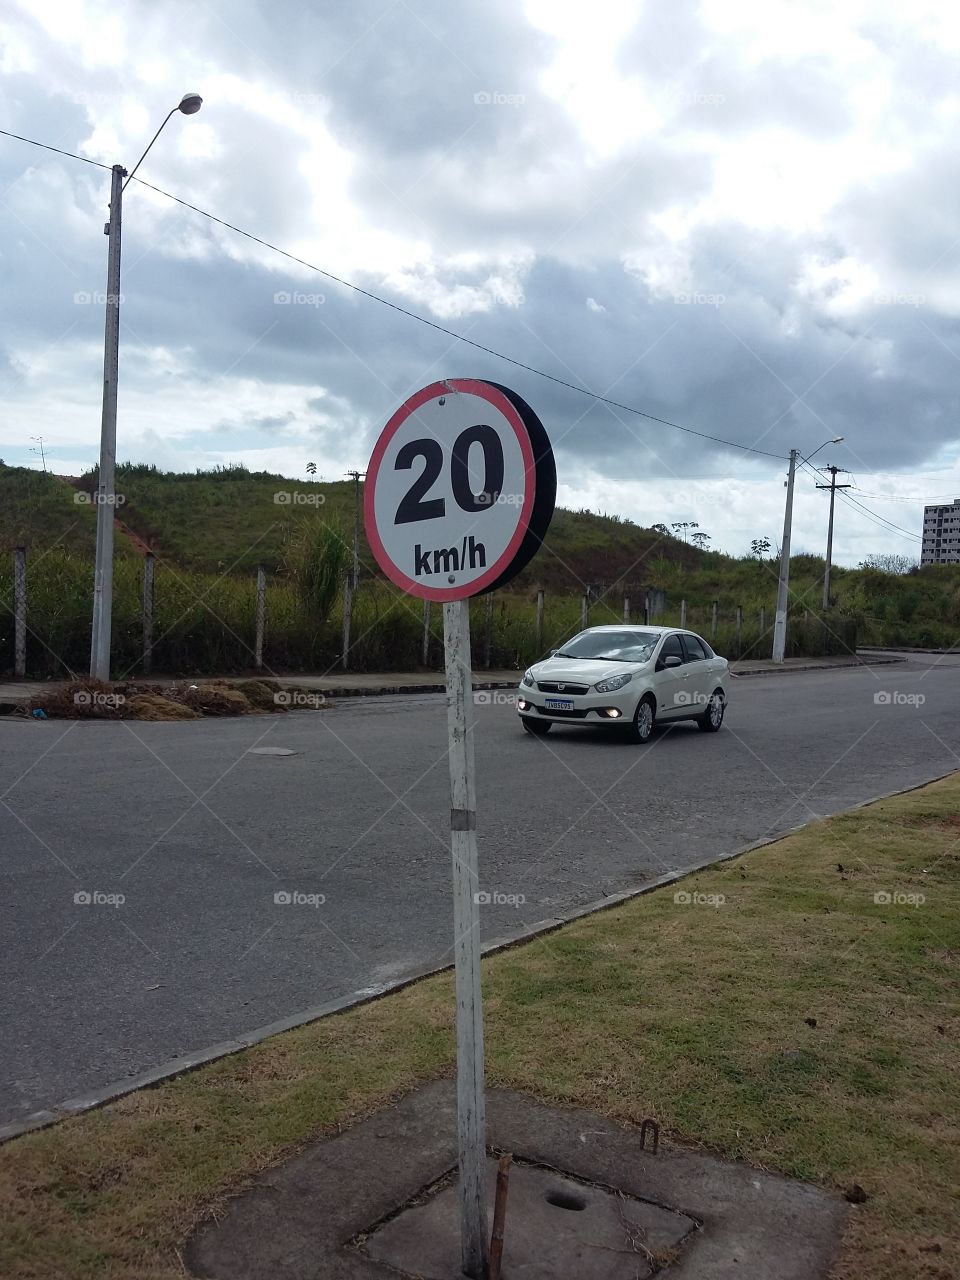 Example of signs used in Brazilian traffic.